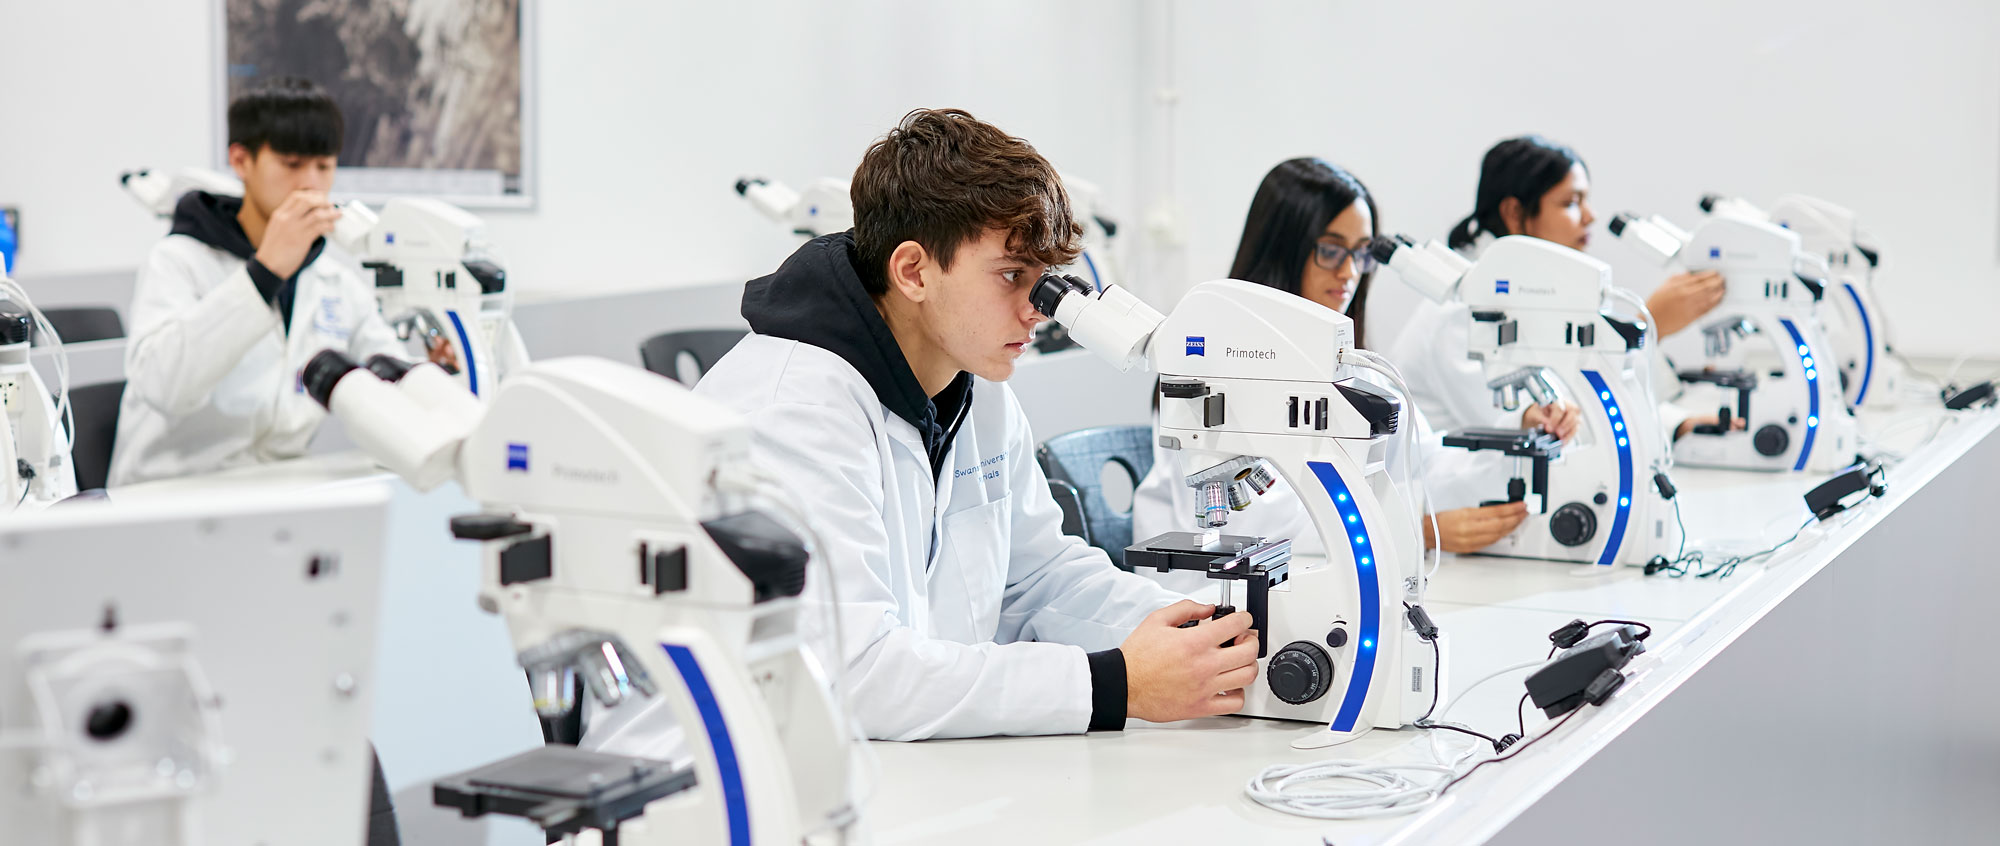 Students in lab with microscopes